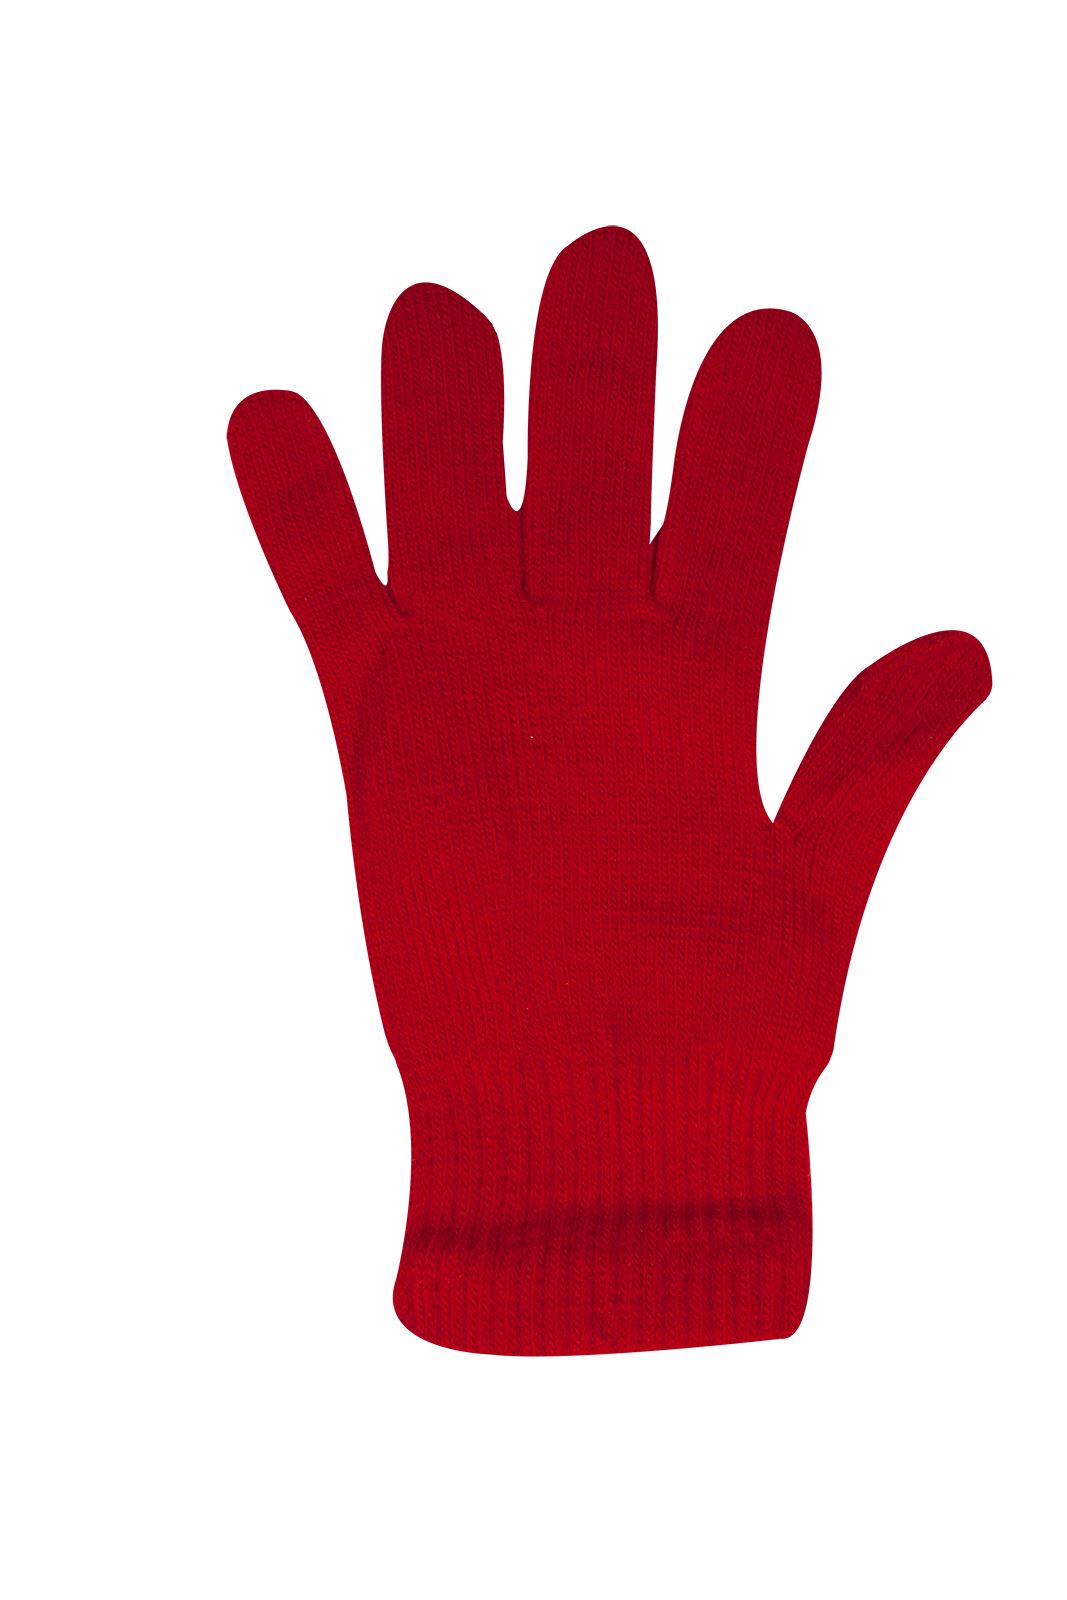 Ladies Girls MAGIC Gloves Stretchy Warm Winter Magic Gloves Berry Red